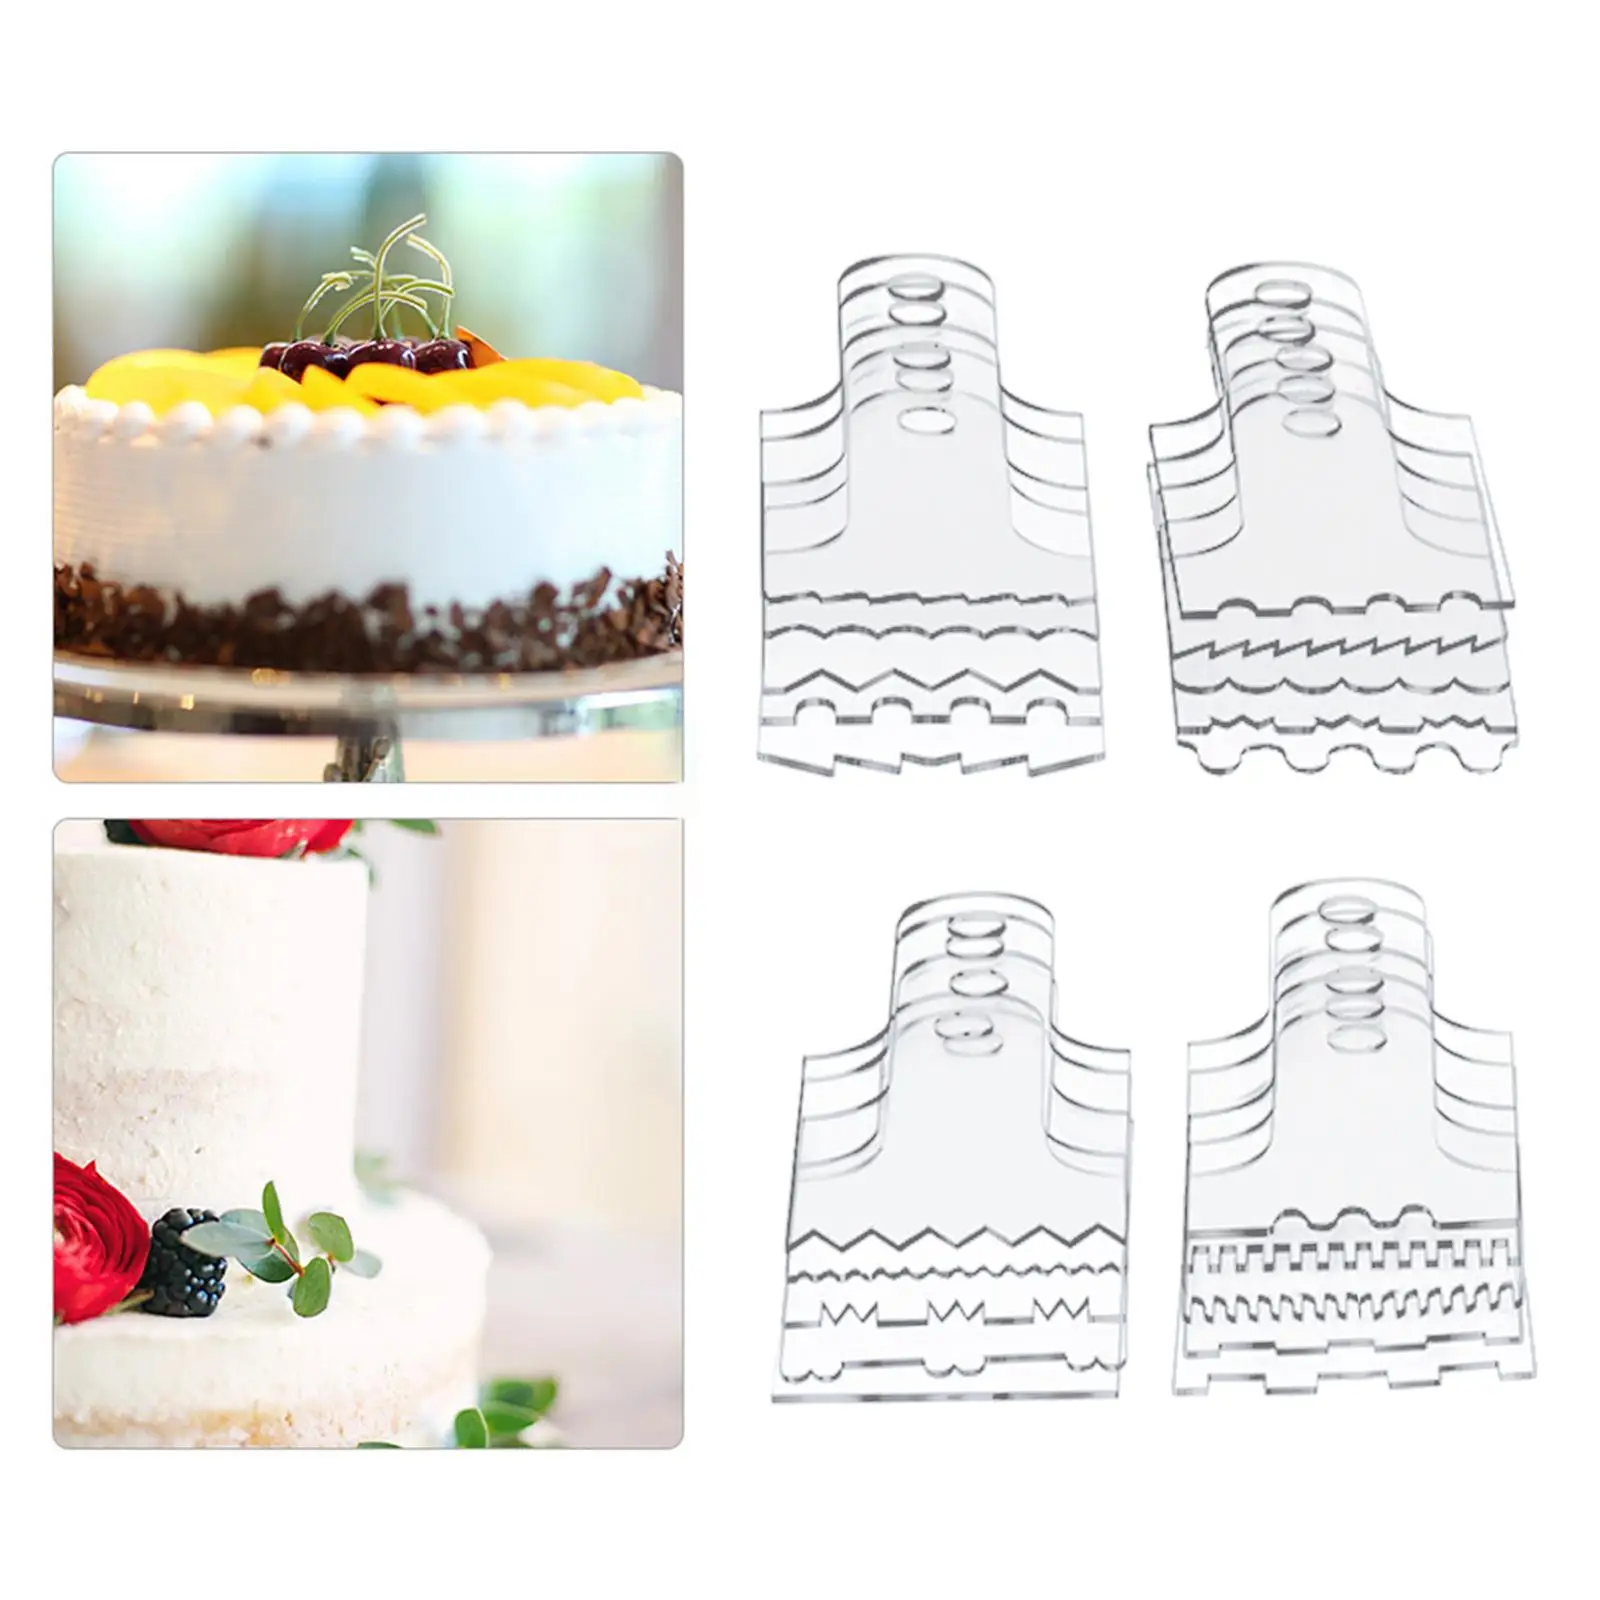 20x Cake Scraper Decorating Tool Supplies Icing for Kitchen Wedding